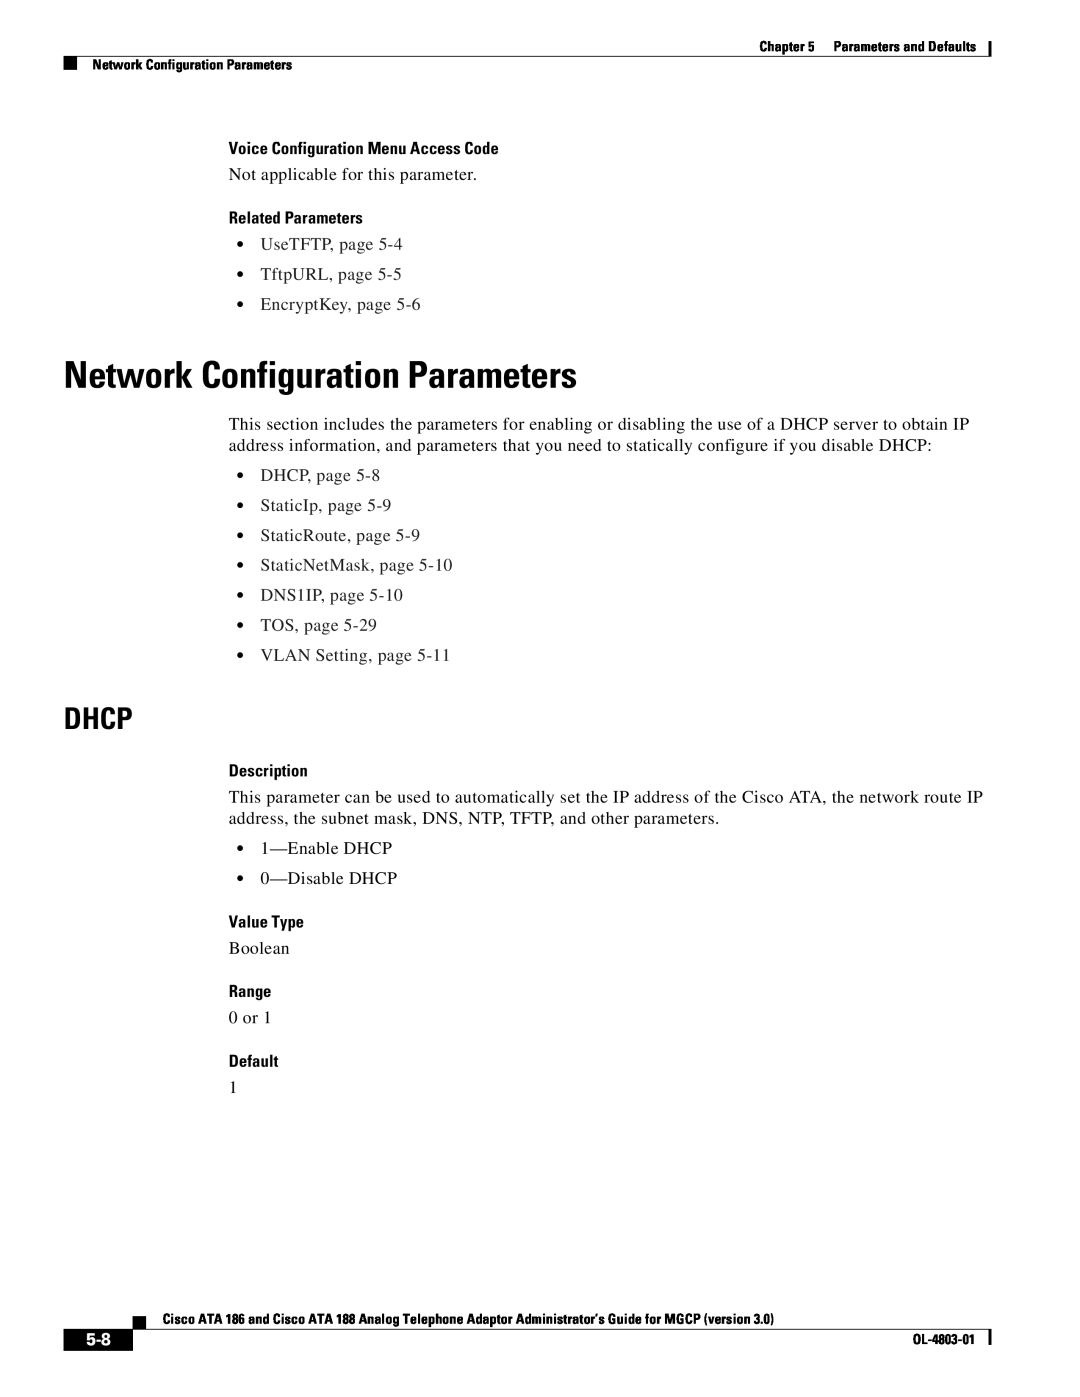 Cisco Systems ATA 186 Network Configuration Parameters, Dhcp, UseTFTP, page TftpURL, page EncryptKey, page, Description 